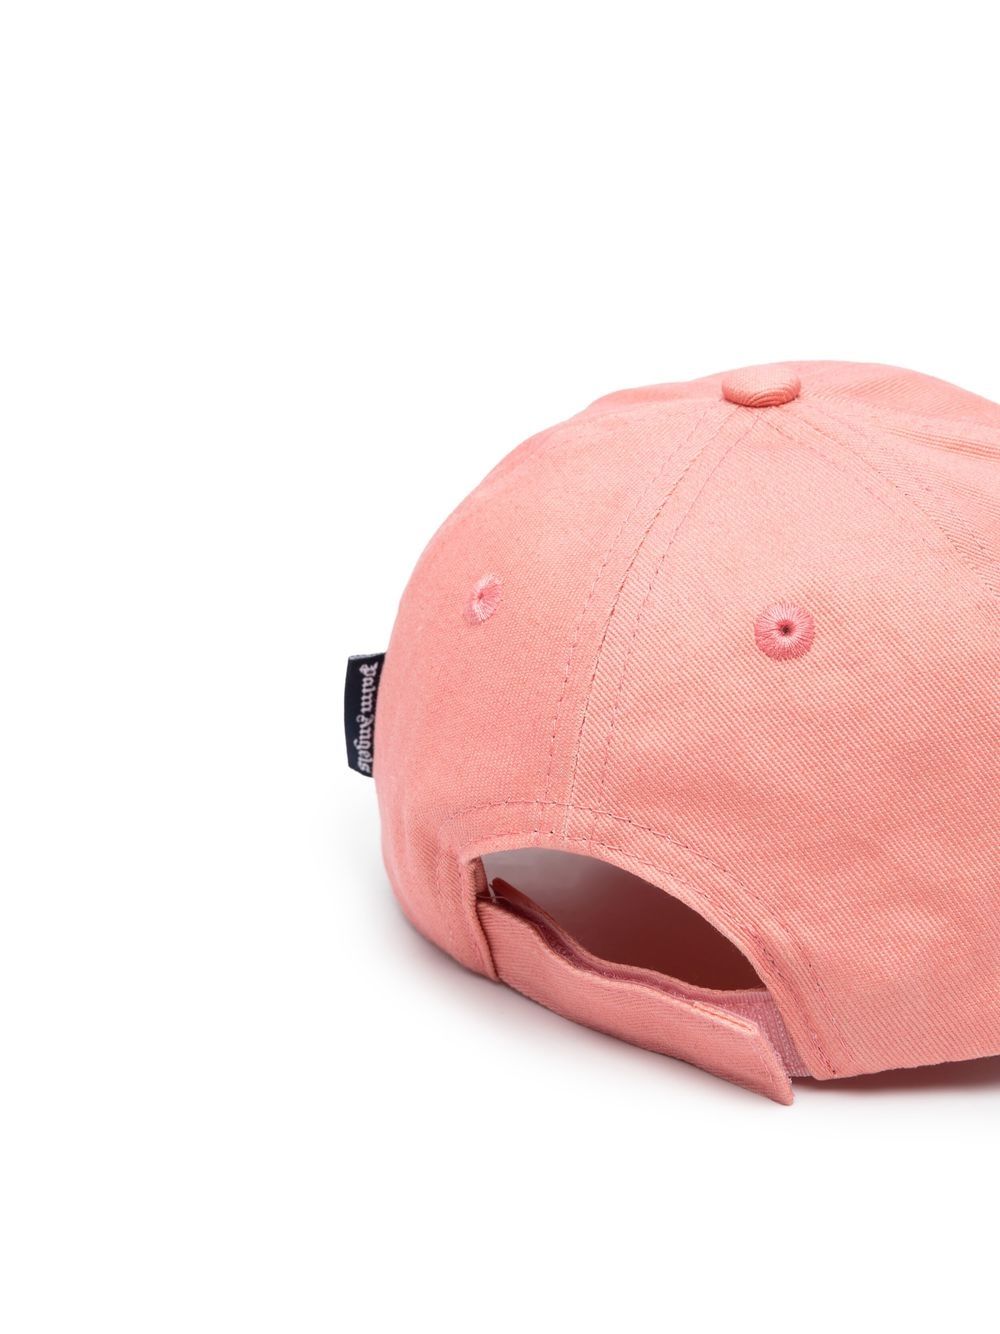 Baseball hat with embroidery<br>